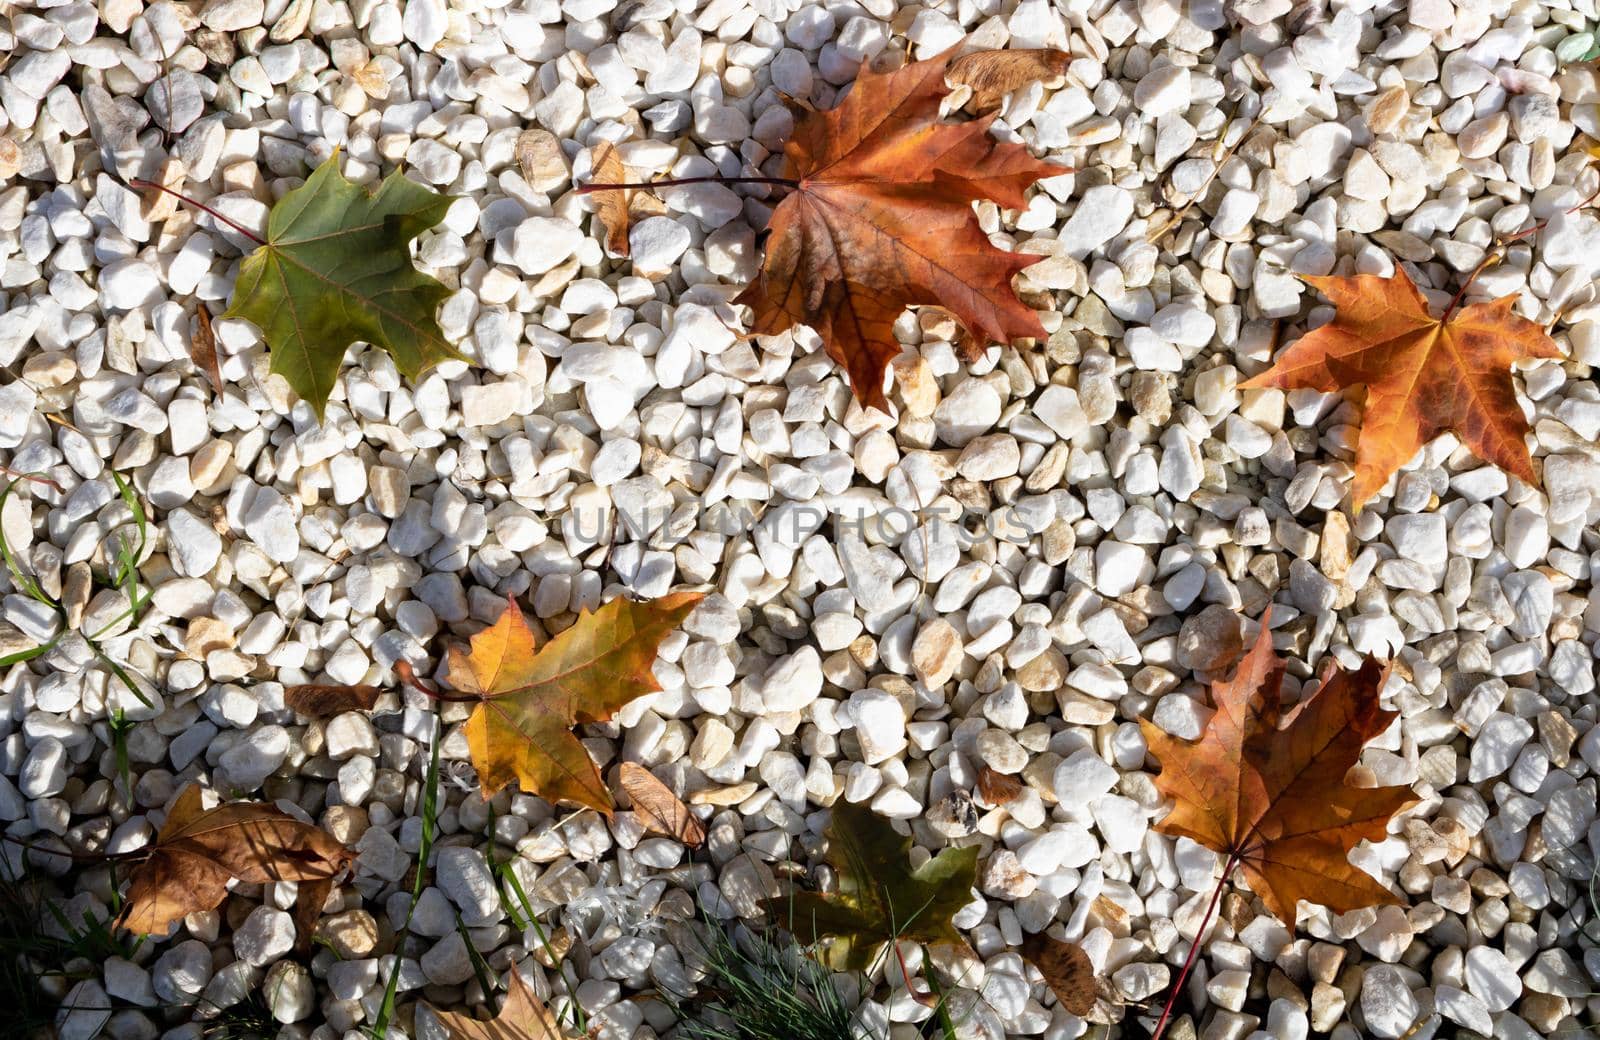 Fallen autumn leaves lie on white pebbles. Natural background of colorful foliage and stones. Top view.